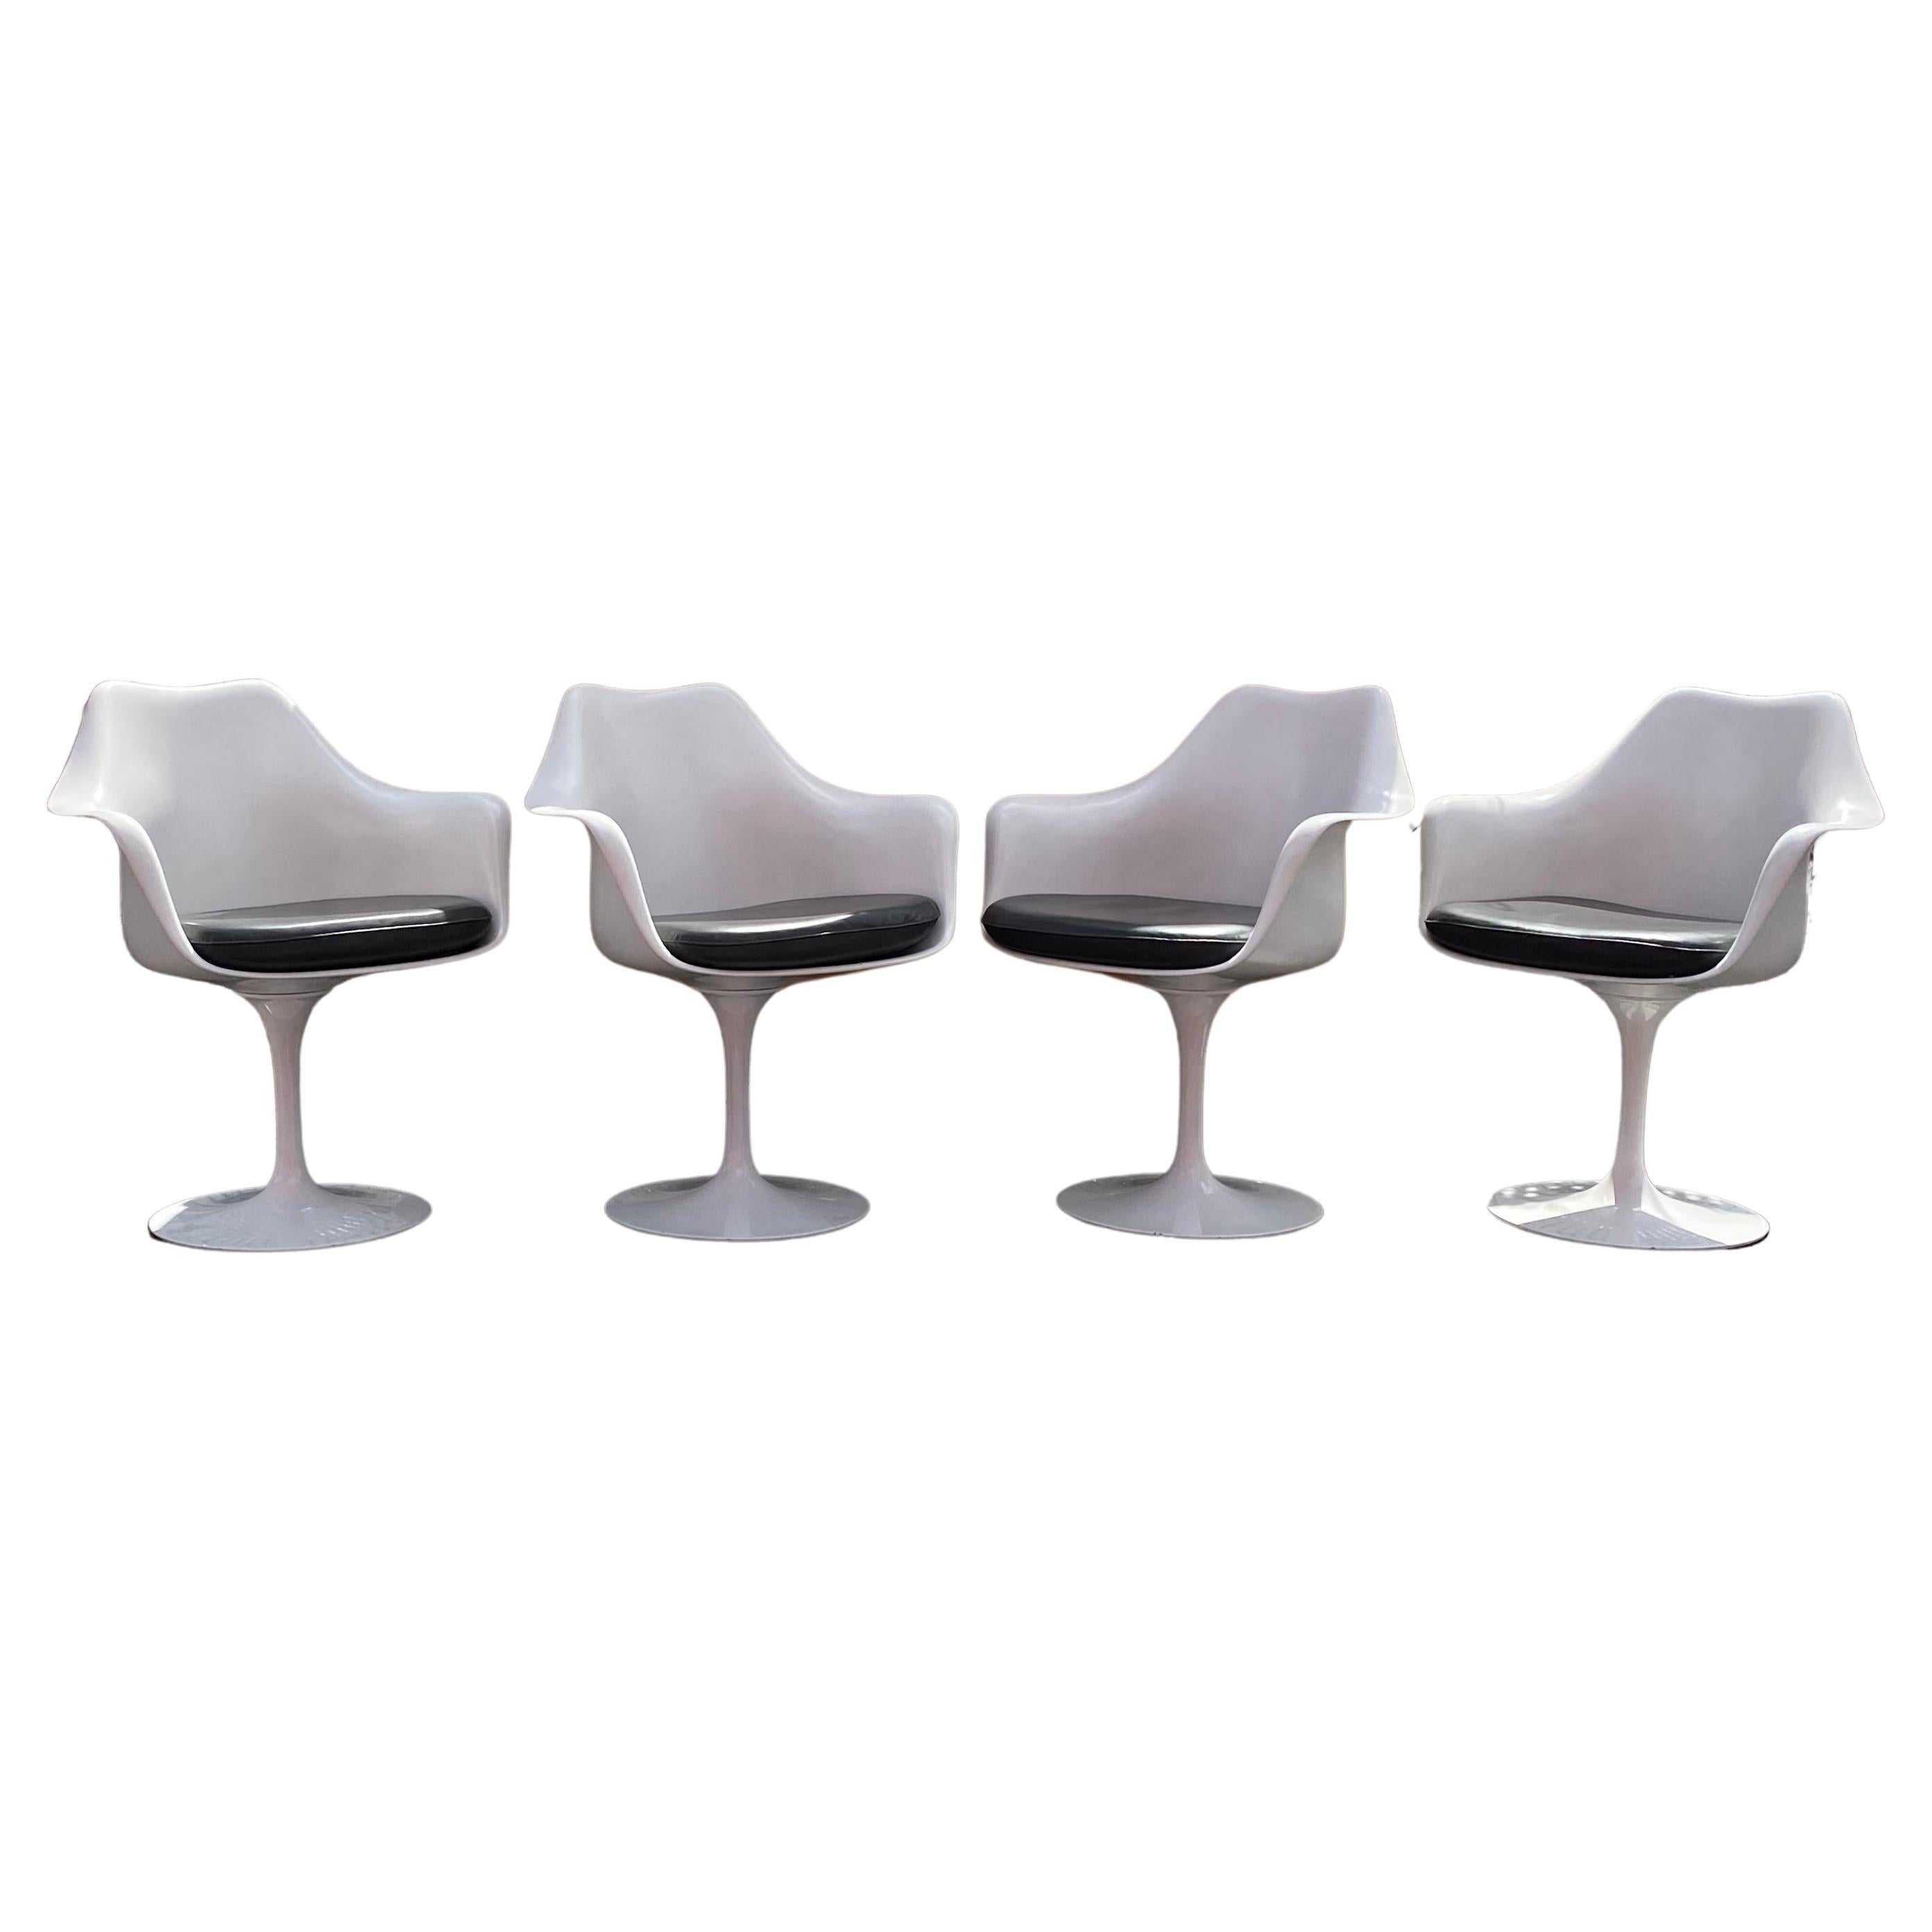 1970s Swivel Tulip Leather Chairs Eero Saarinen for Knoll, Set of 4 For Sale